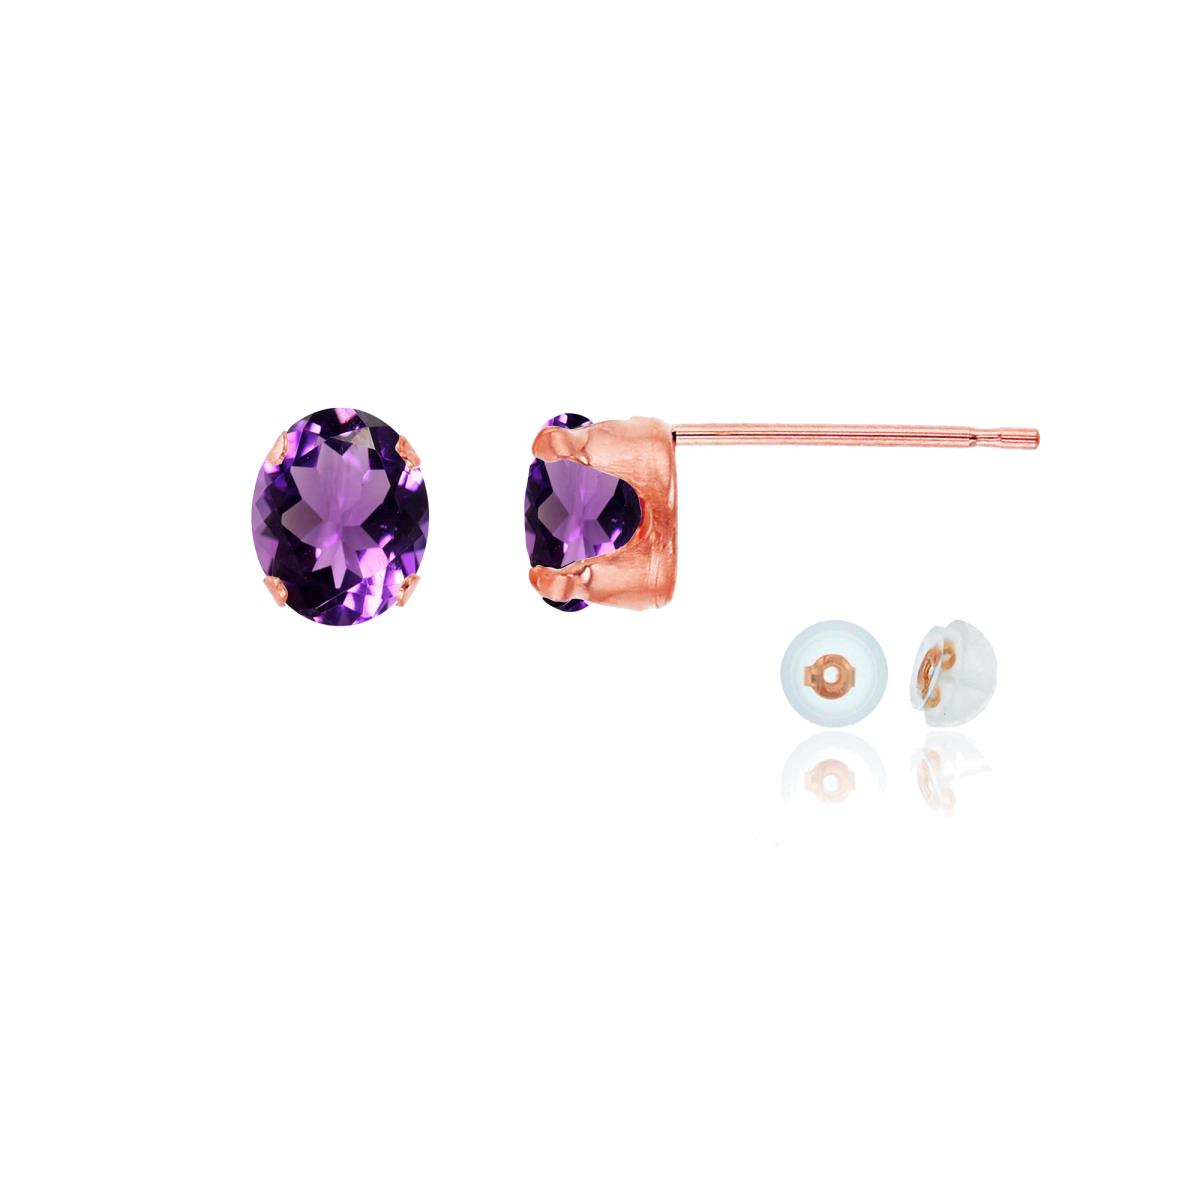 14K Rose Gold 6x4mm Oval Amethyst Stud Earring with Silicone Back